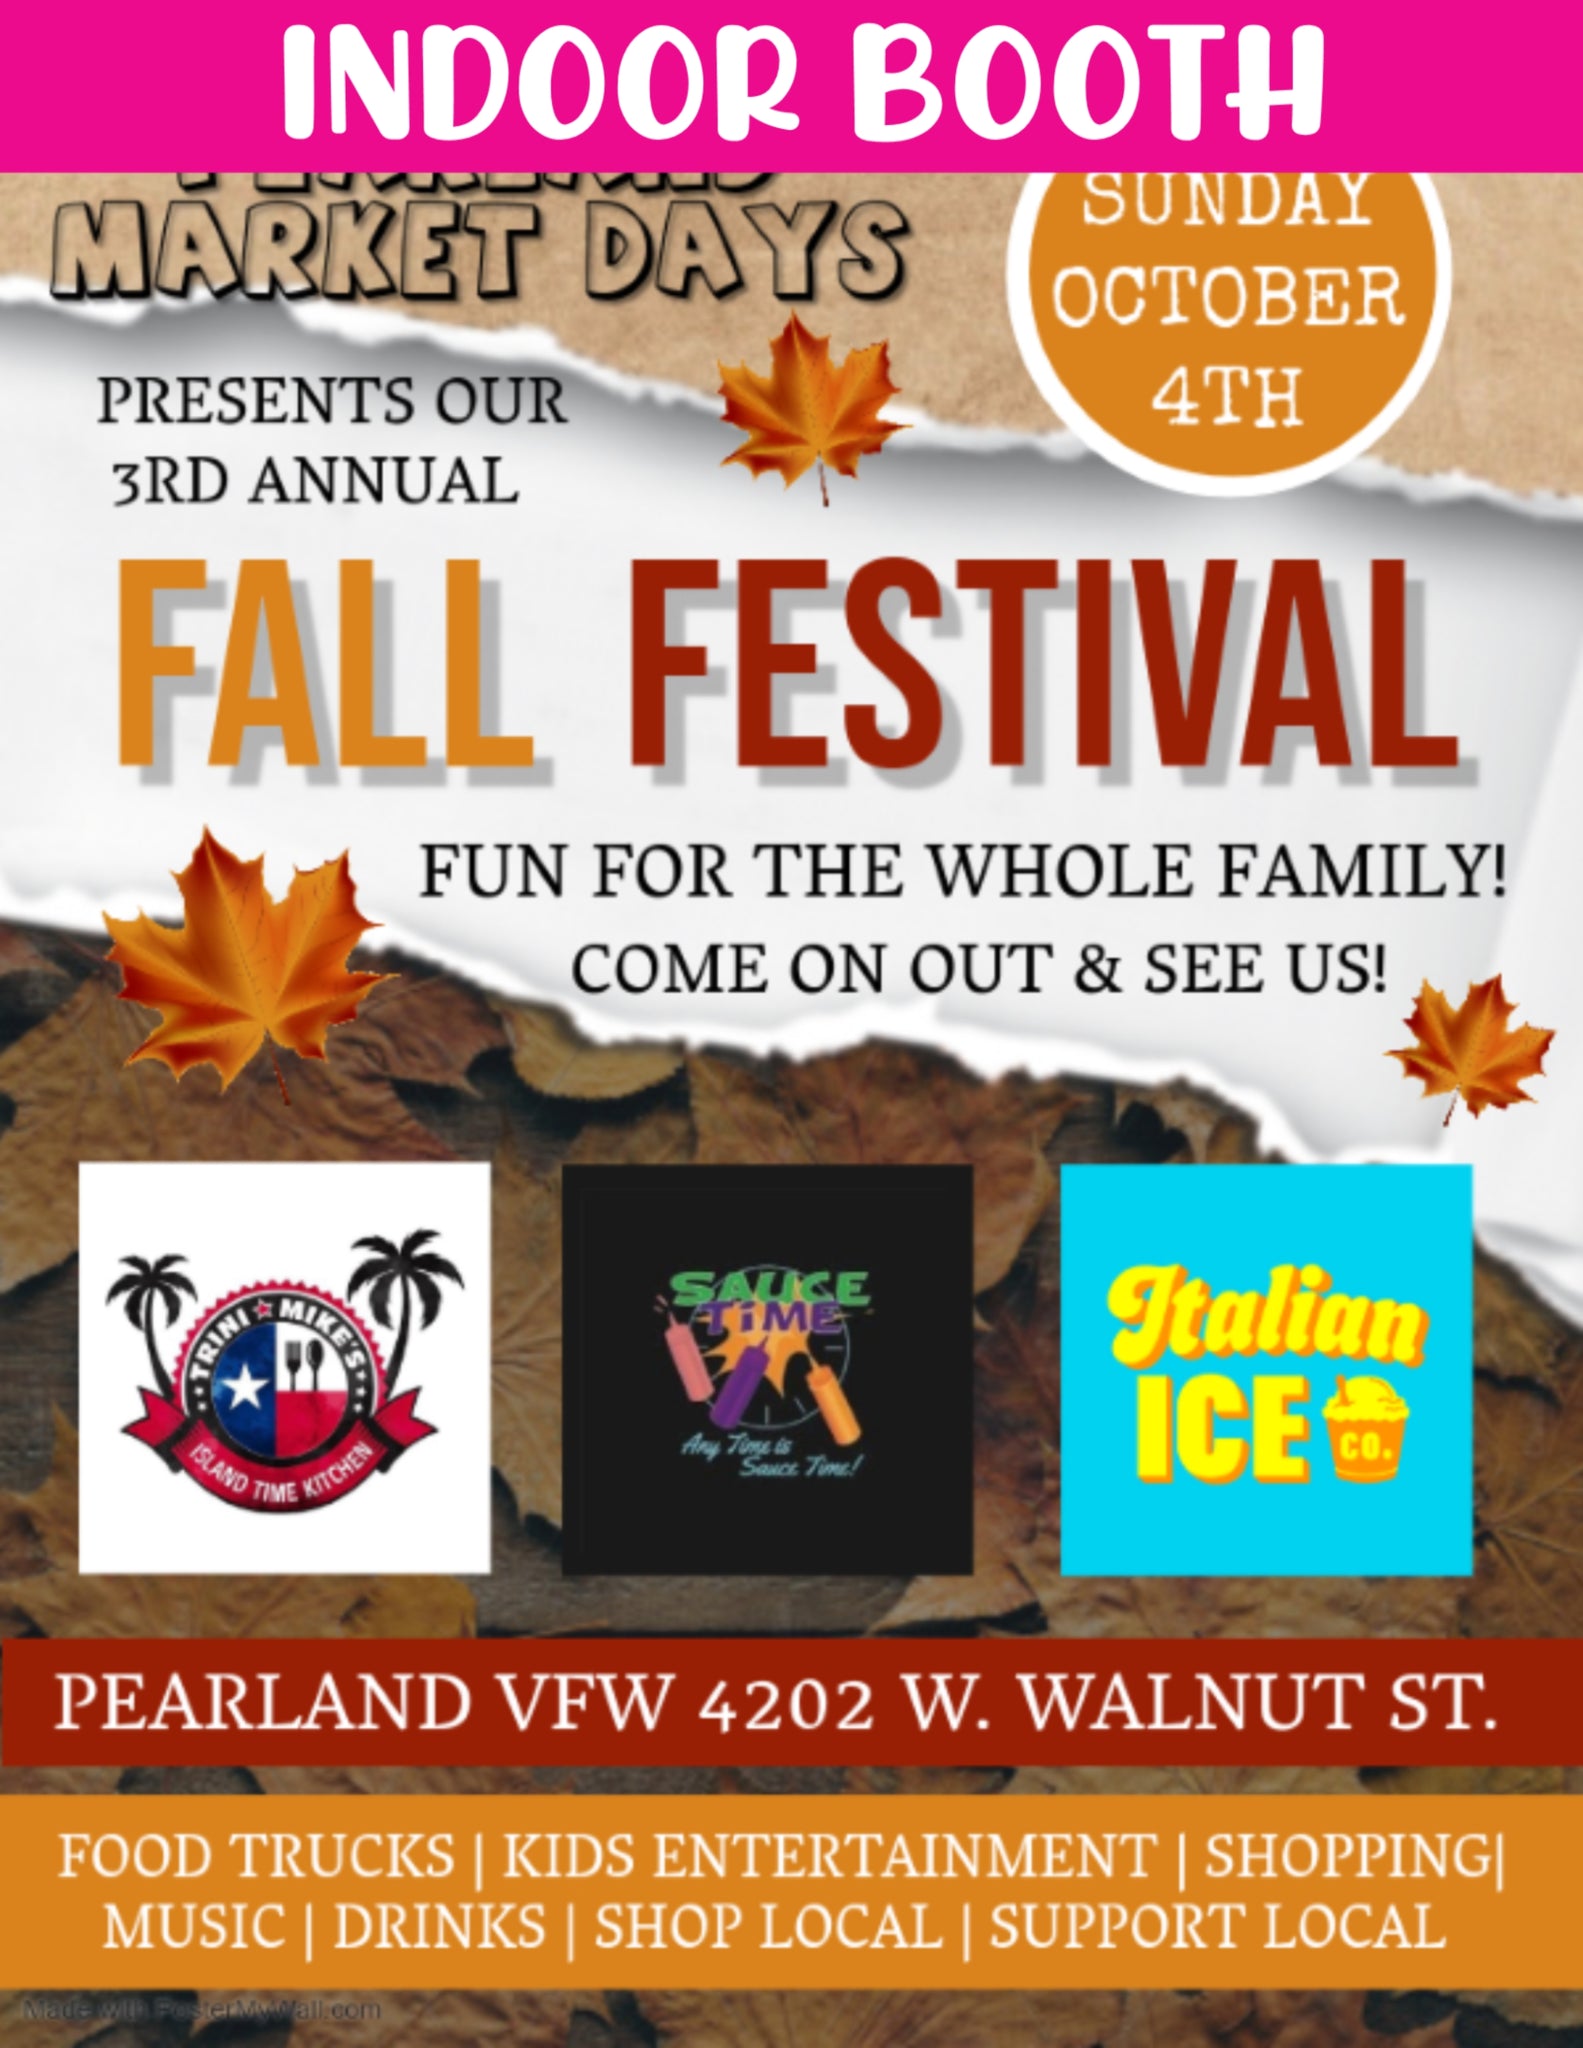 Pearland Sunday October 4, 2020 - INDOOR BOOTH